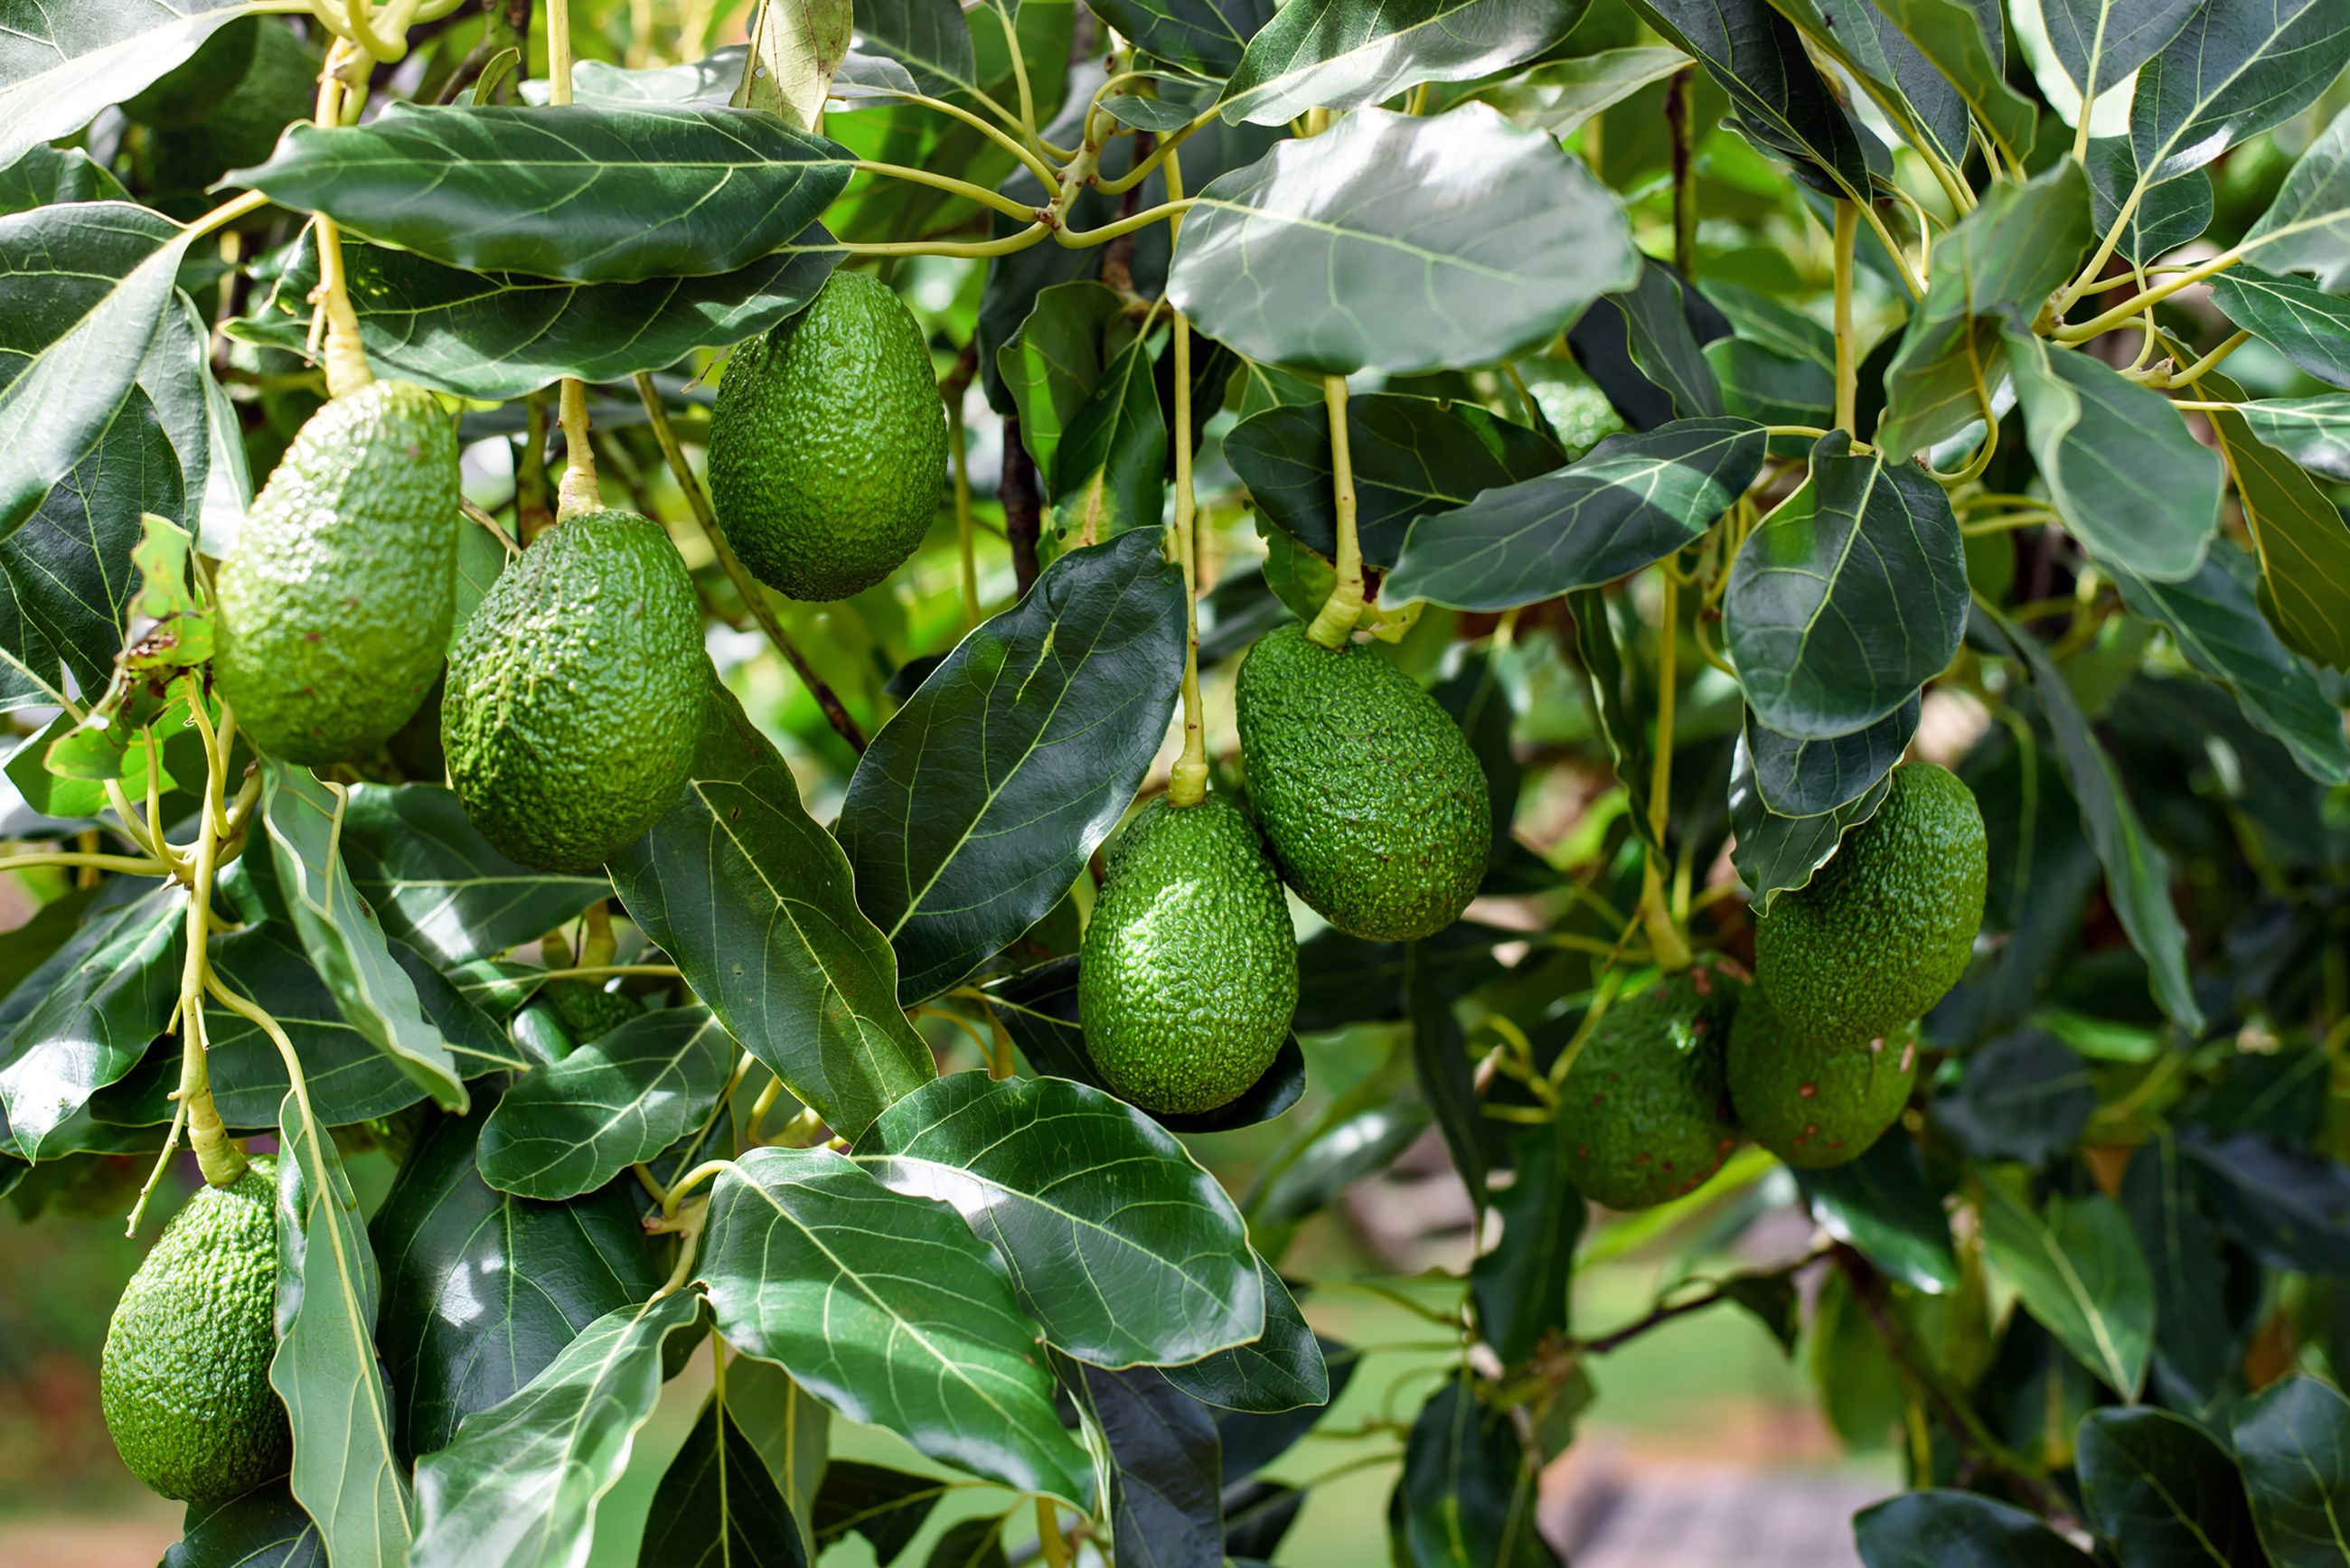 How to Grow an Avocado Tree From a Pit at Home